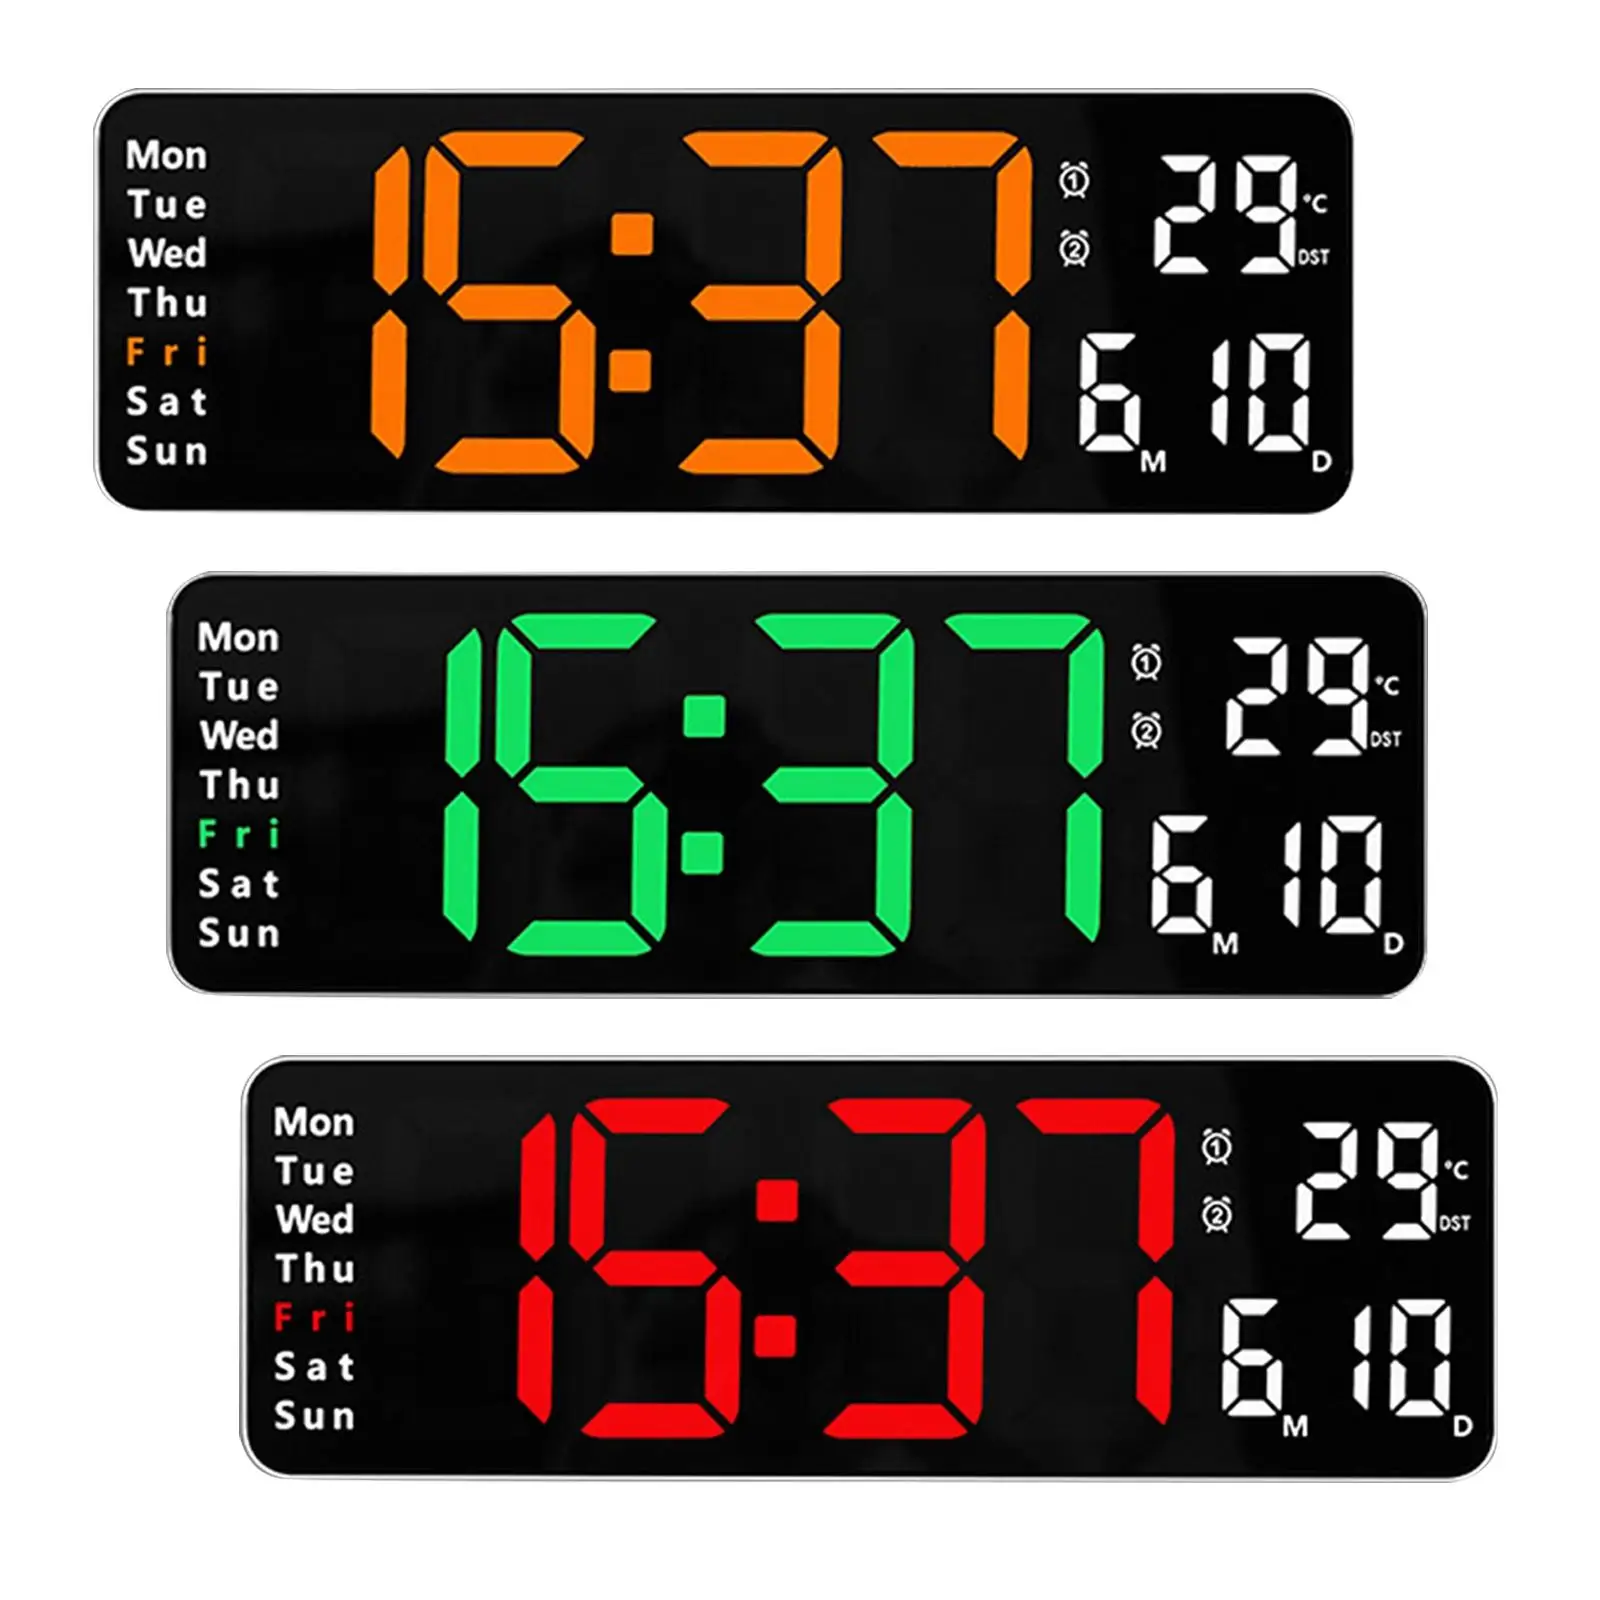 Large Display Digital Clock Date Week Mute USB with Remote Control Wall Mounted Wall/Tablw Clock for Bedroom Home